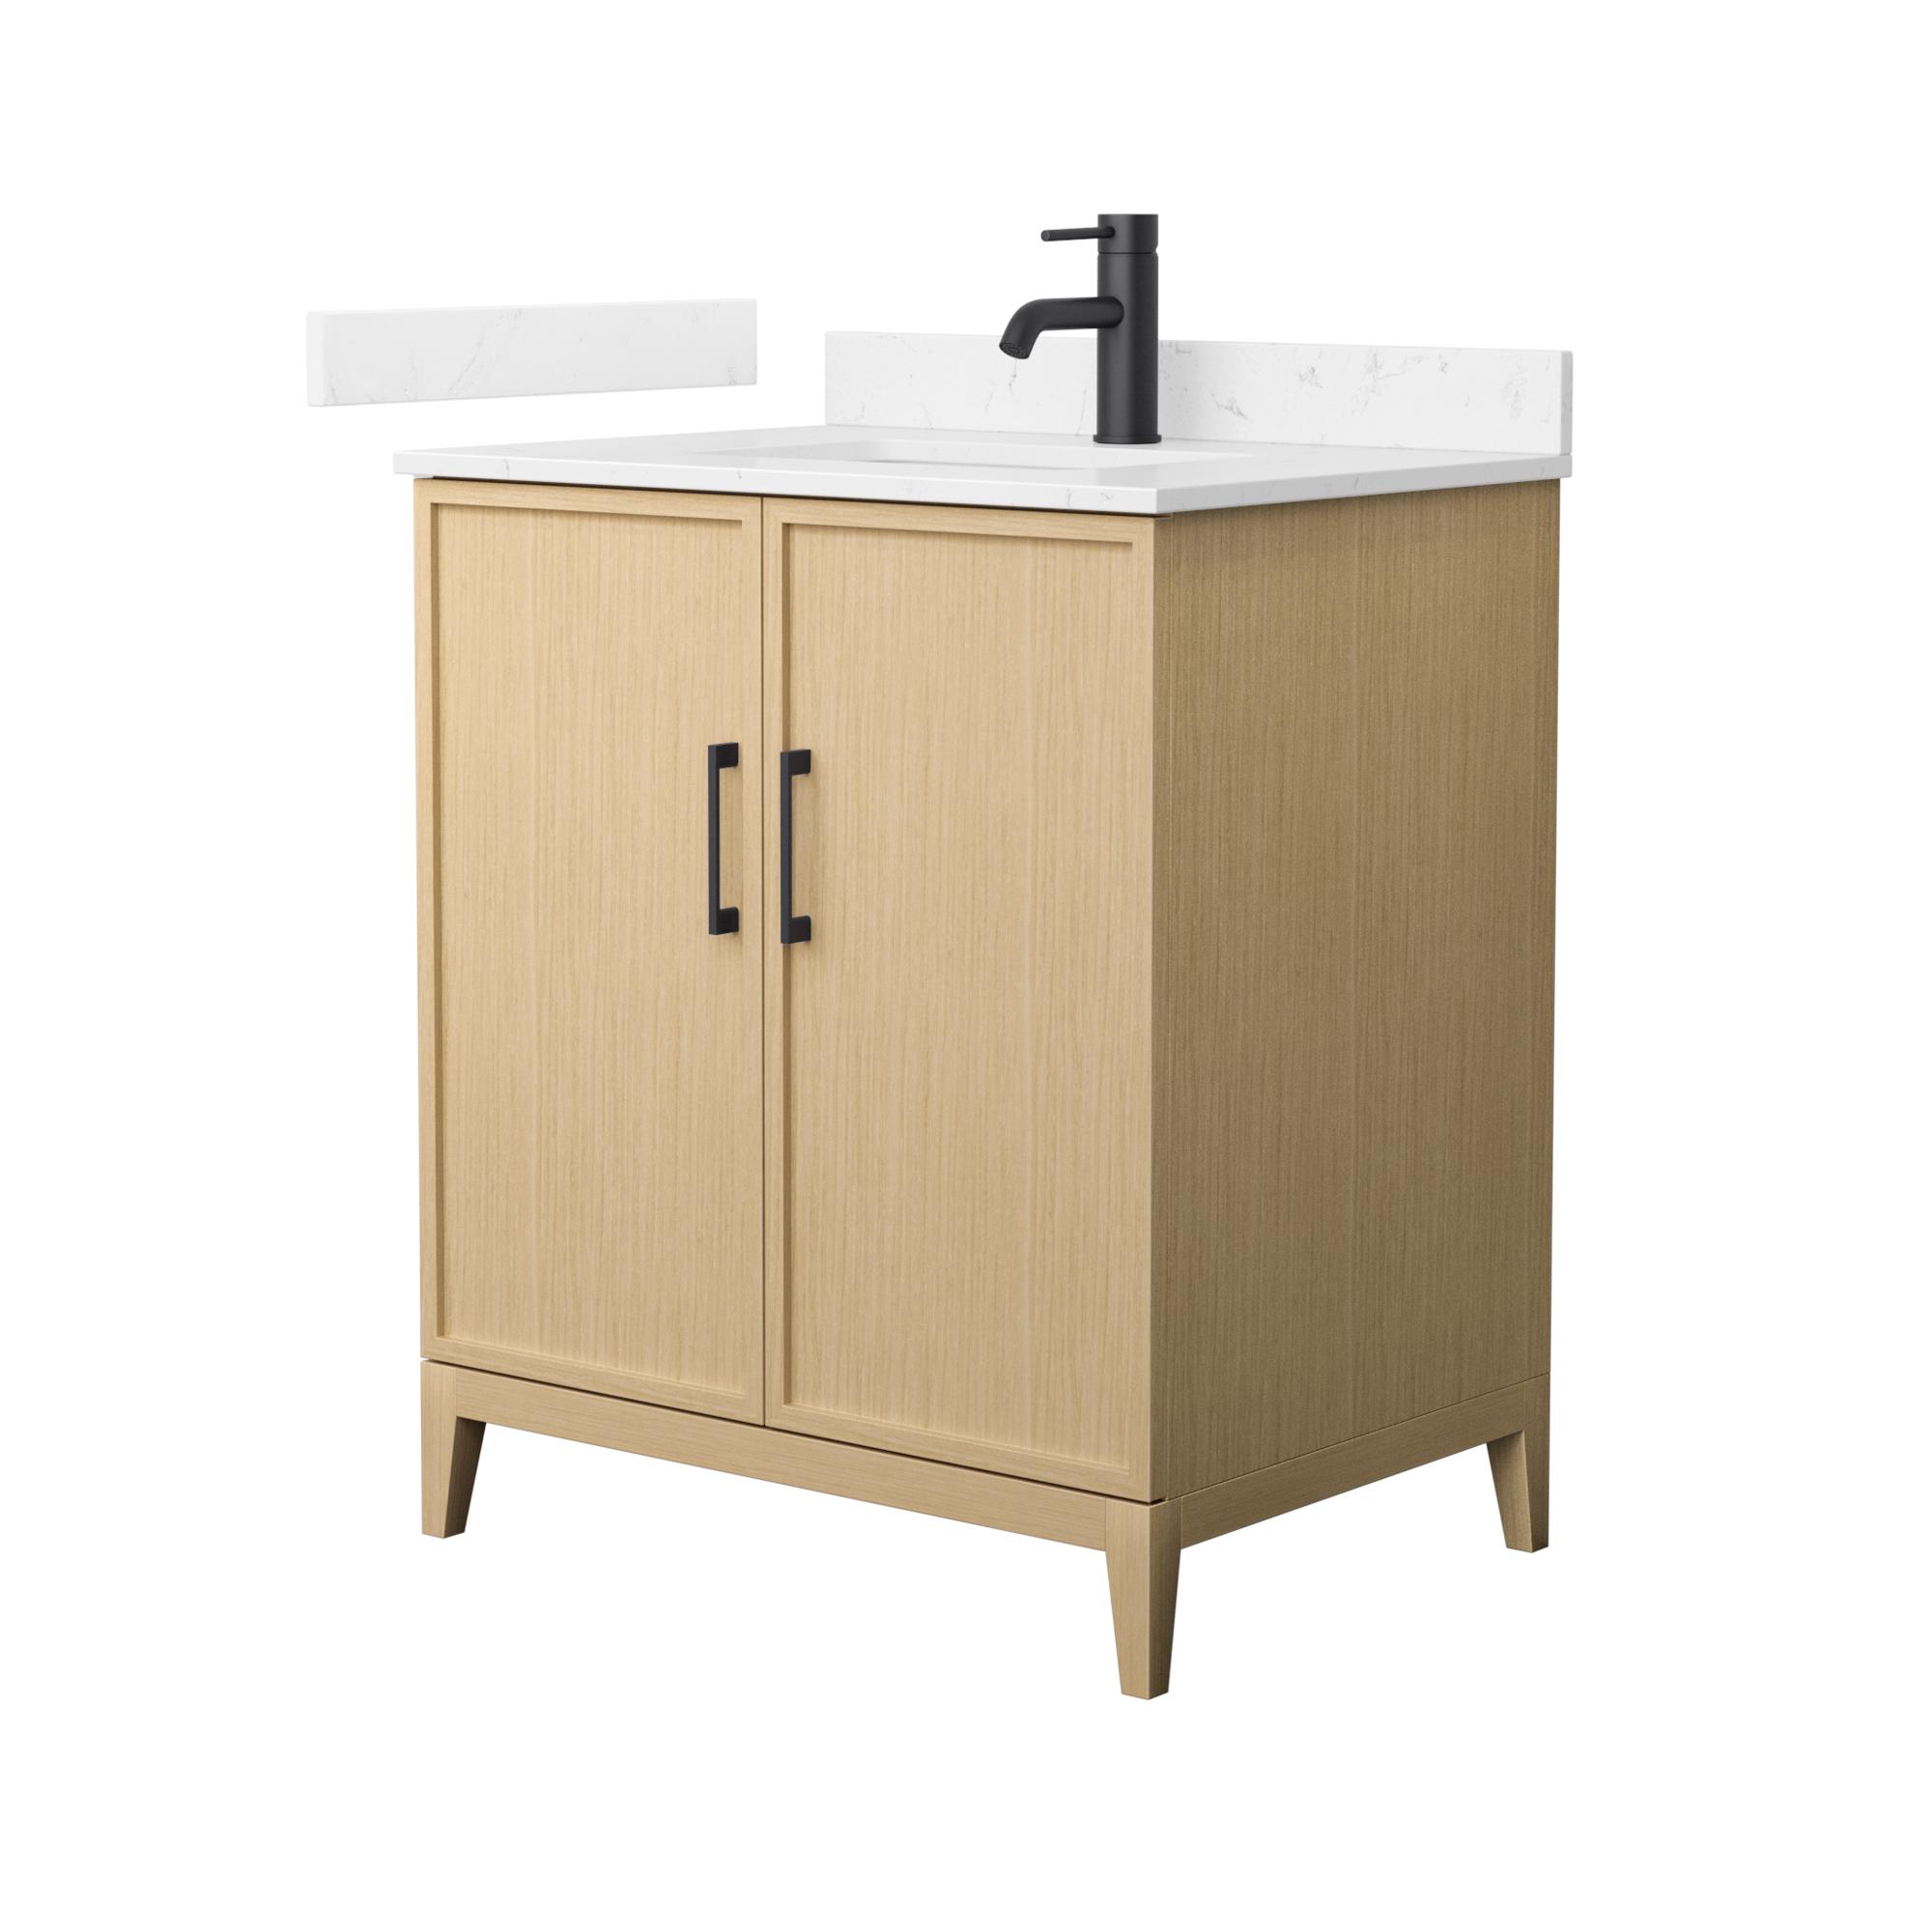 30" Transitional Single Vanity Base in White Oak, 3 Top Options with 3 Hardware Options